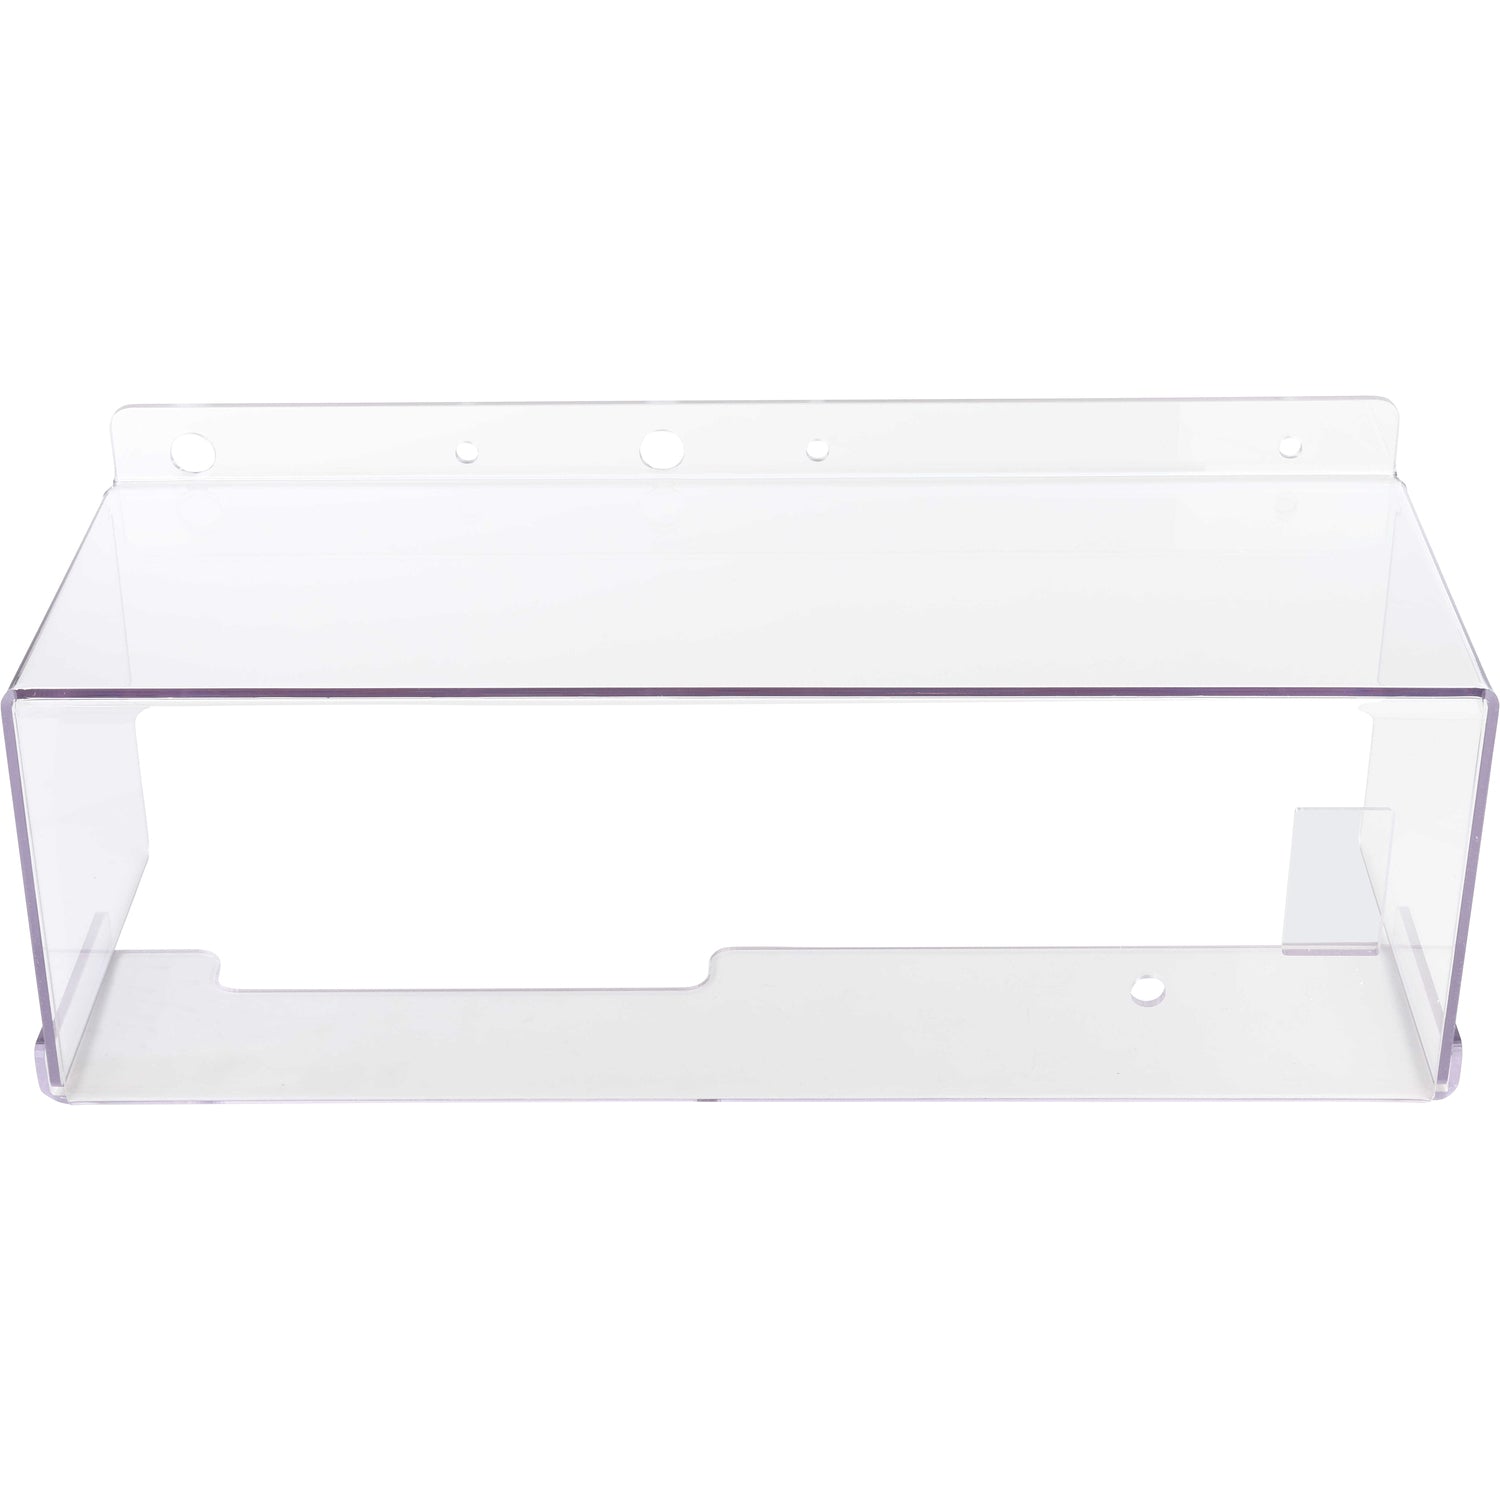 Rectangular, bent, clear, impact resistant polycarbonate guarding with multiple holes cut into it. Guard is shown on white background. 